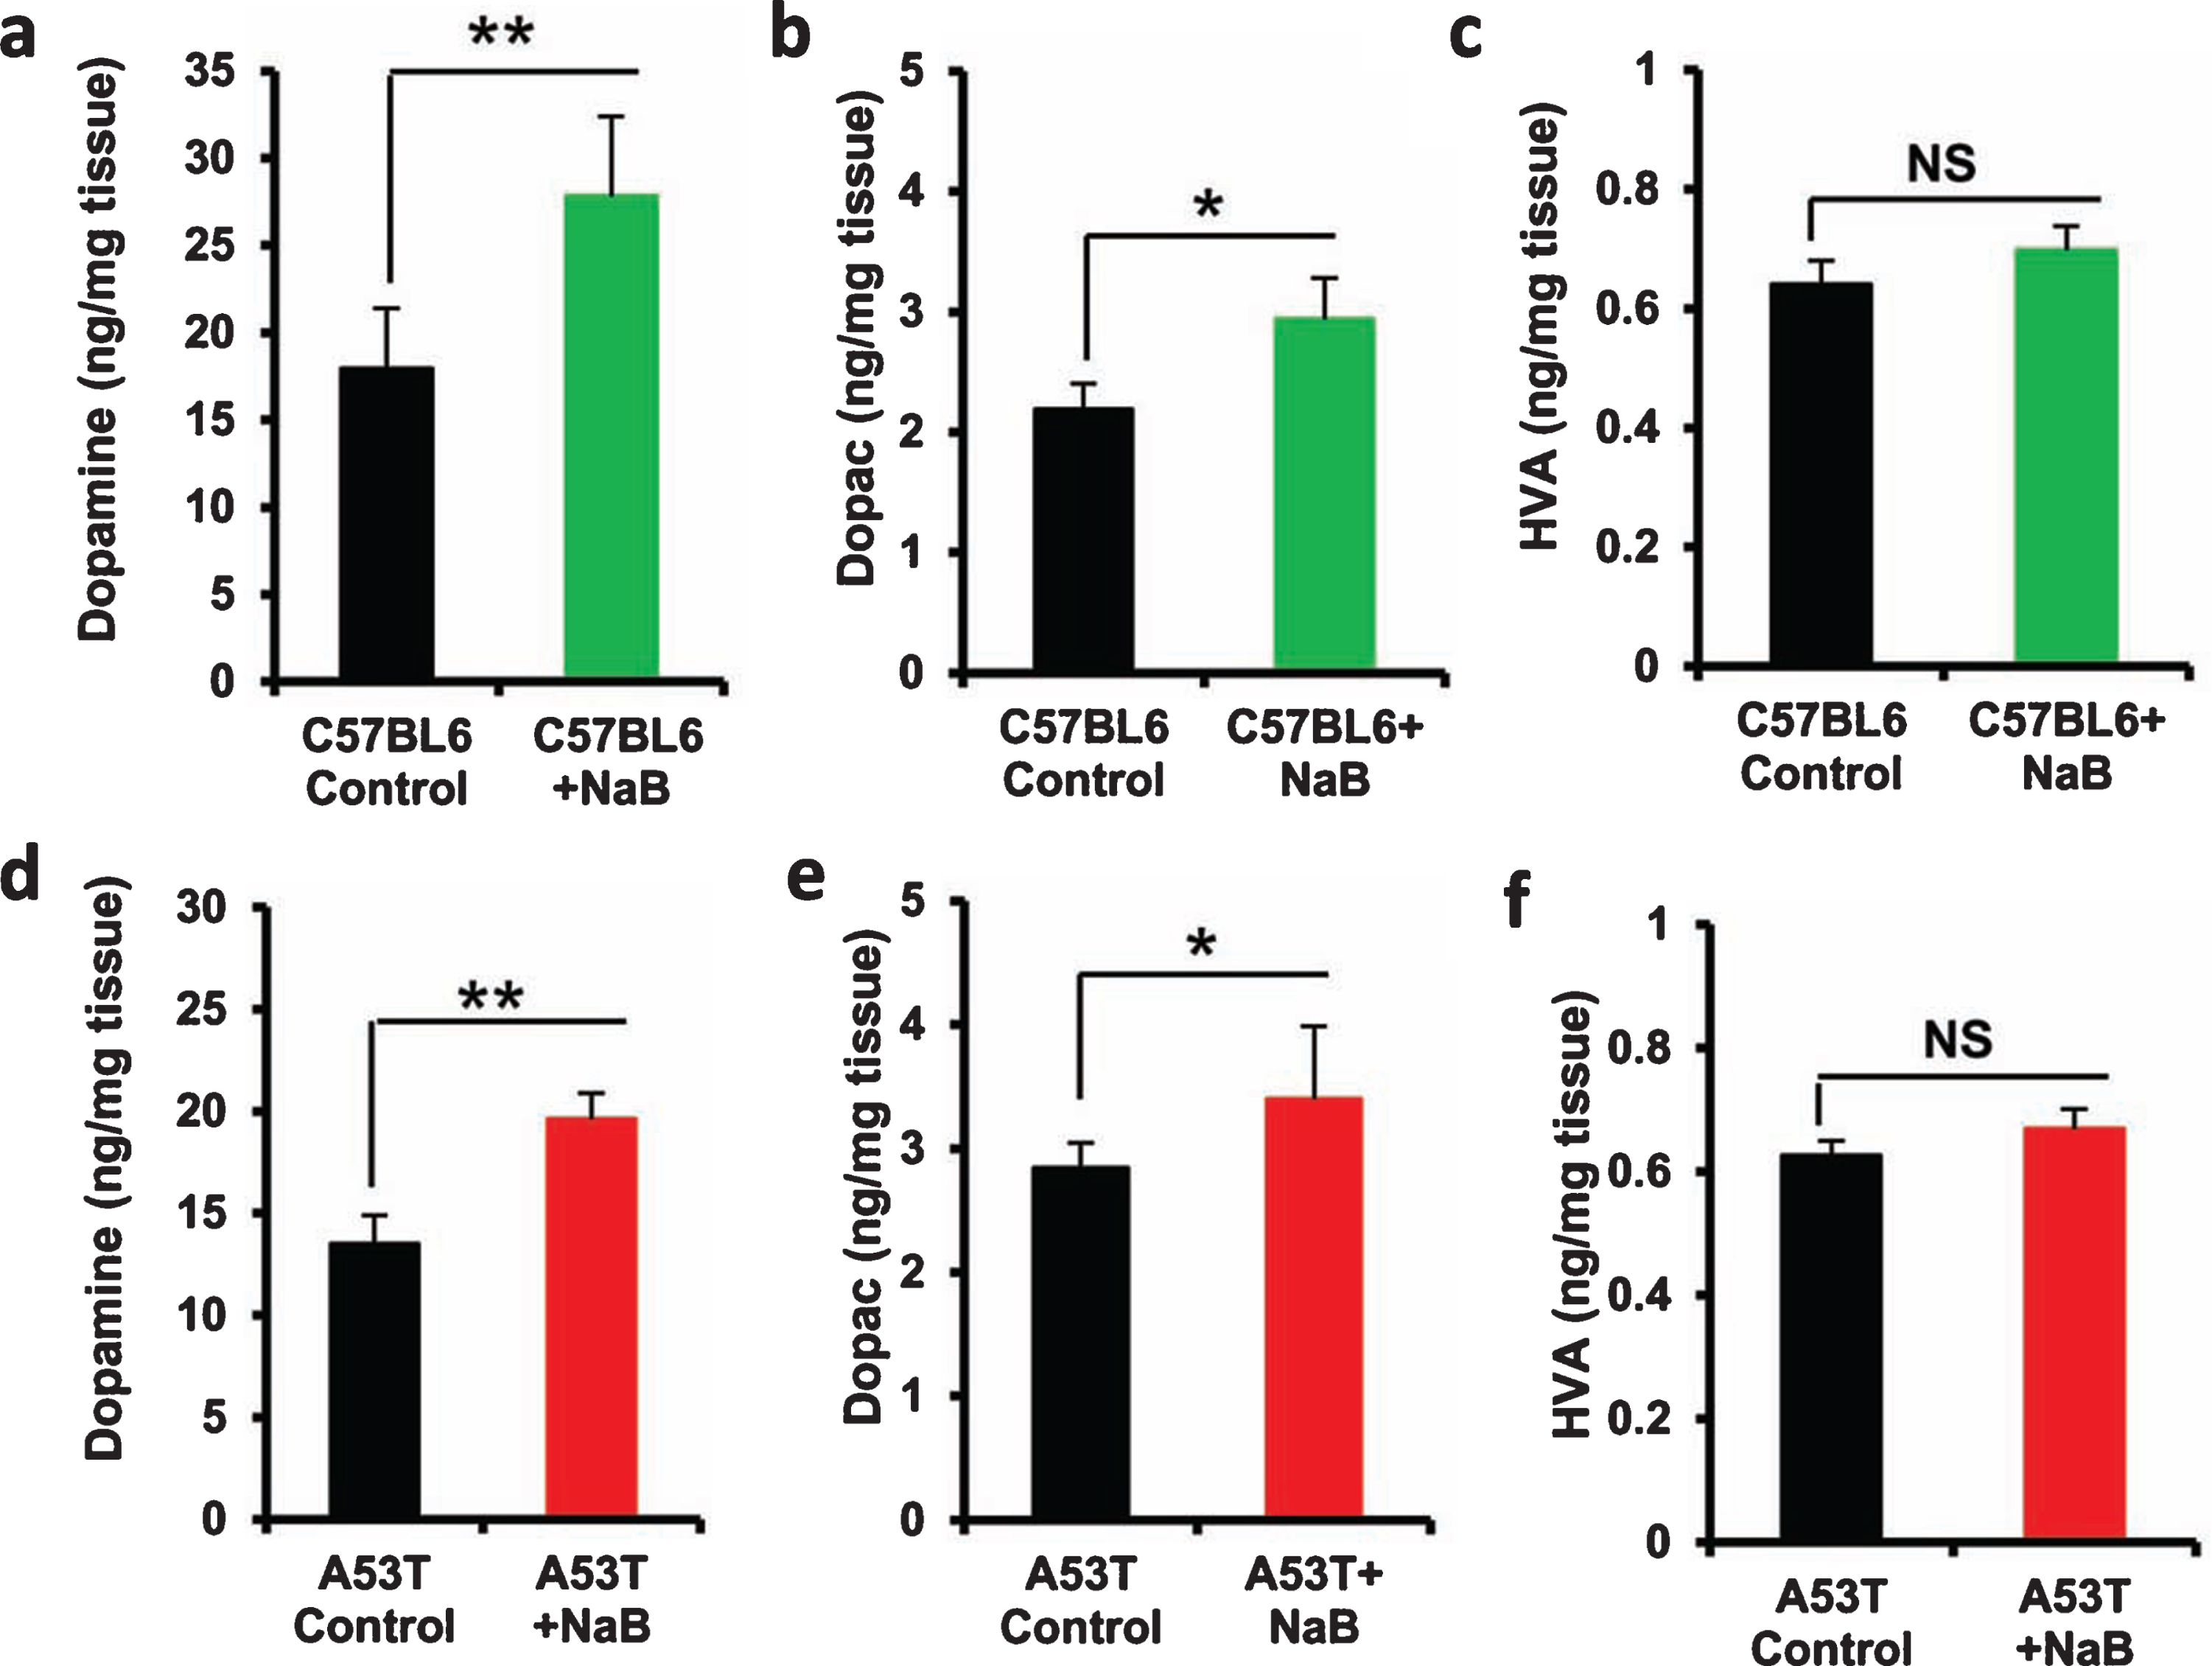 Oral NaB increases the level of DA in vivo in the striatum of C57/BL6 and A53T-Tg mice. Male C57/BL6 (A-C) and A53T-Tg (D-F) mice (n = 5 per group) were treated with NaB (50 mg/kg body wt/d) mixed in 0.5% methylcellulose orally via gavage. Control mice received 0.5% methylcellulose as vehicle. After 30 d of treatment, levels of DA (A, D), DOPAC (B, E), and HVA (C, F) were measured in striatum by HPLC. Results are mean±SEM of five mice per group. **p < 0.01 and *p < 0.05 versus control by two-tailed paired t-tests. NS, not significant.